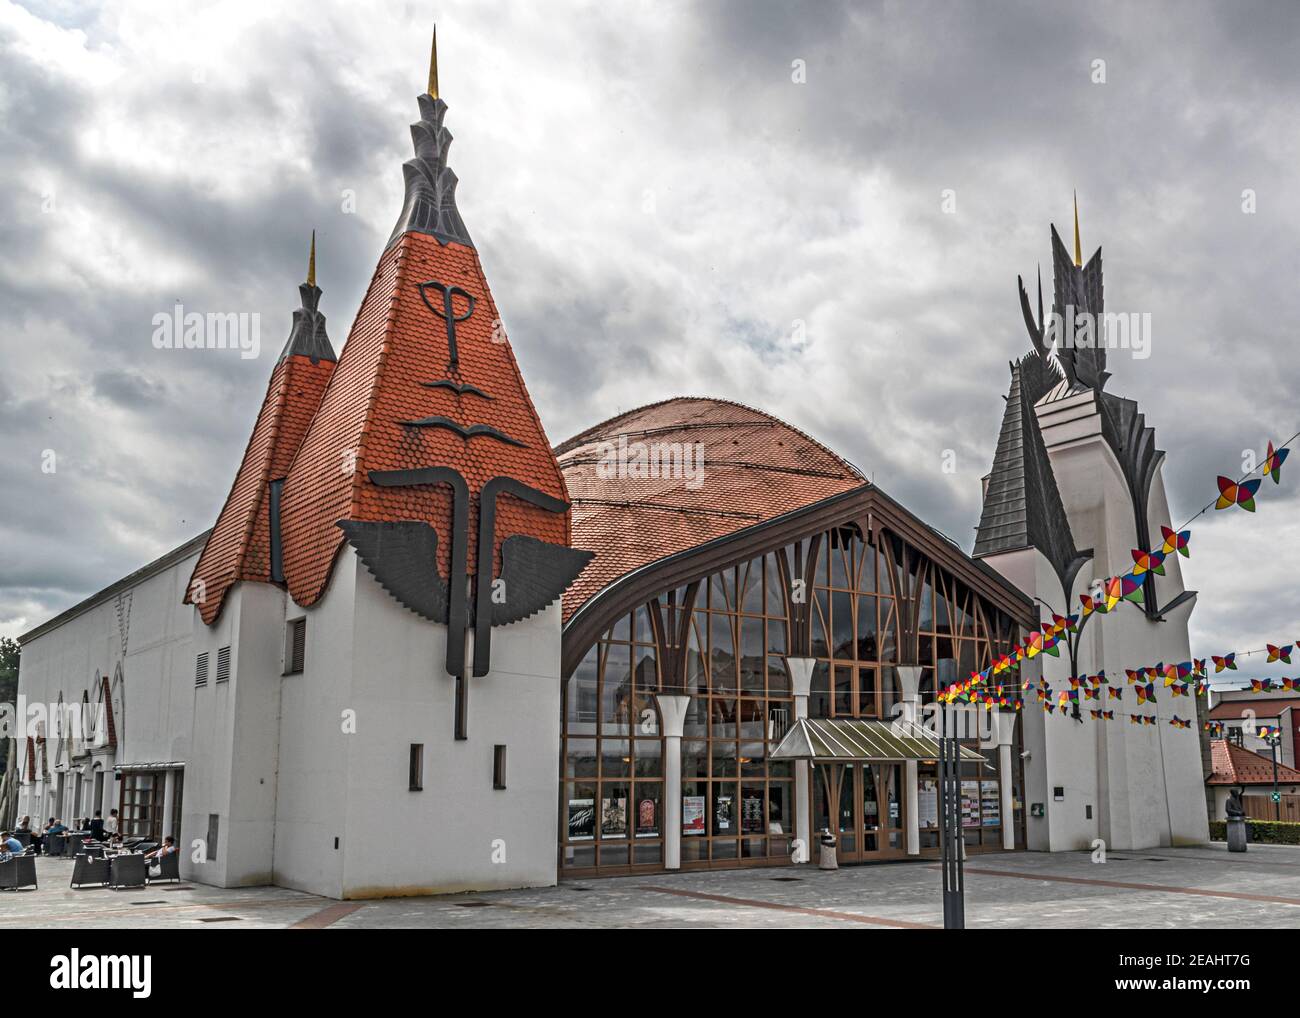 Cultural center. The particular theater and cultural center of Lendava, Slovenia, built in 1995 by the Hungarian architect Imre Makovecz (1935-2011), Stock Photo